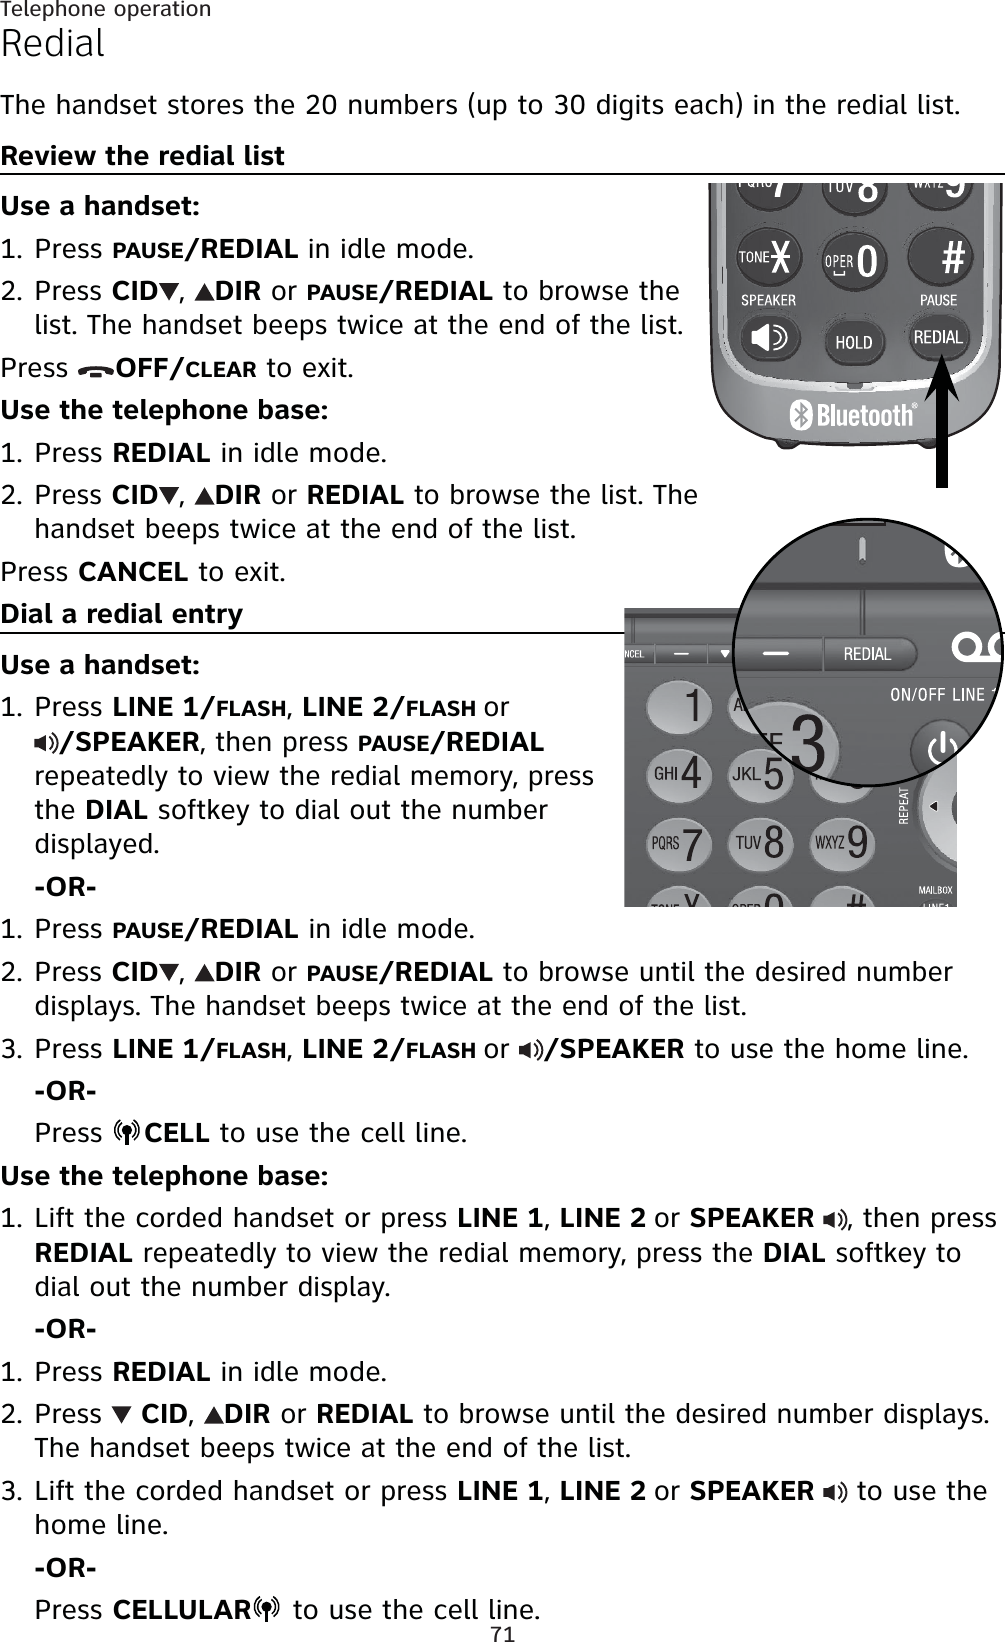 71Telephone operationRedialThe handset stores the 20 numbers (up to 30 digits each) in the redial list.Review the redial listUse a handset:Press PAUSE/REDIAL in idle mode.Press CID ,DIRorPAUSE/REDIALto browse the list. The handset beeps twice at the end of the list.Press  OFF/CLEAR to exit.Use the telephone base:Press REDIAL in idle mode.Press CID ,DIRor REDIAL to browse the list. The handset beeps twice at the end of the list.Press CANCEL to exit.Dial a redial entryUse a handset:Press LINE 1/FLASH,LINE 2/FLASHor/SPEAKER, then pressPAUSE/REDIALrepeatedly to view the redial memory, press the DIALsoftkey to dial out the number displayed.-OR-Press PAUSE/REDIAL in idle mode.Press CID ,DIRorPAUSE/REDIALto browse until the desired number displays. The handset beeps twice at the end of the list.Press LINE 1/FLASH,LINE 2/FLASHor/SPEAKER to use the home line.-OR-Press  CELL to use the cell line.Use the telephone base:Lift the corded handset or press LINE 1,LINE 2orSPEAKER, then press REDIAL repeatedly to view the redial memory, press the DIAL softkey to dial out the number display. -OR-Press REDIAL in idle mode.Press CID,DIRor REDIAL to browse until the desired number displays. The handset beeps twice at the end of the list.Lift the corded handset or press LINE 1,LINE 2orSPEAKER  to use the home line.-OR-Press CELLULAR  to use the cell line.1.2.1.2.1.1.2.3.1.1.2.3.